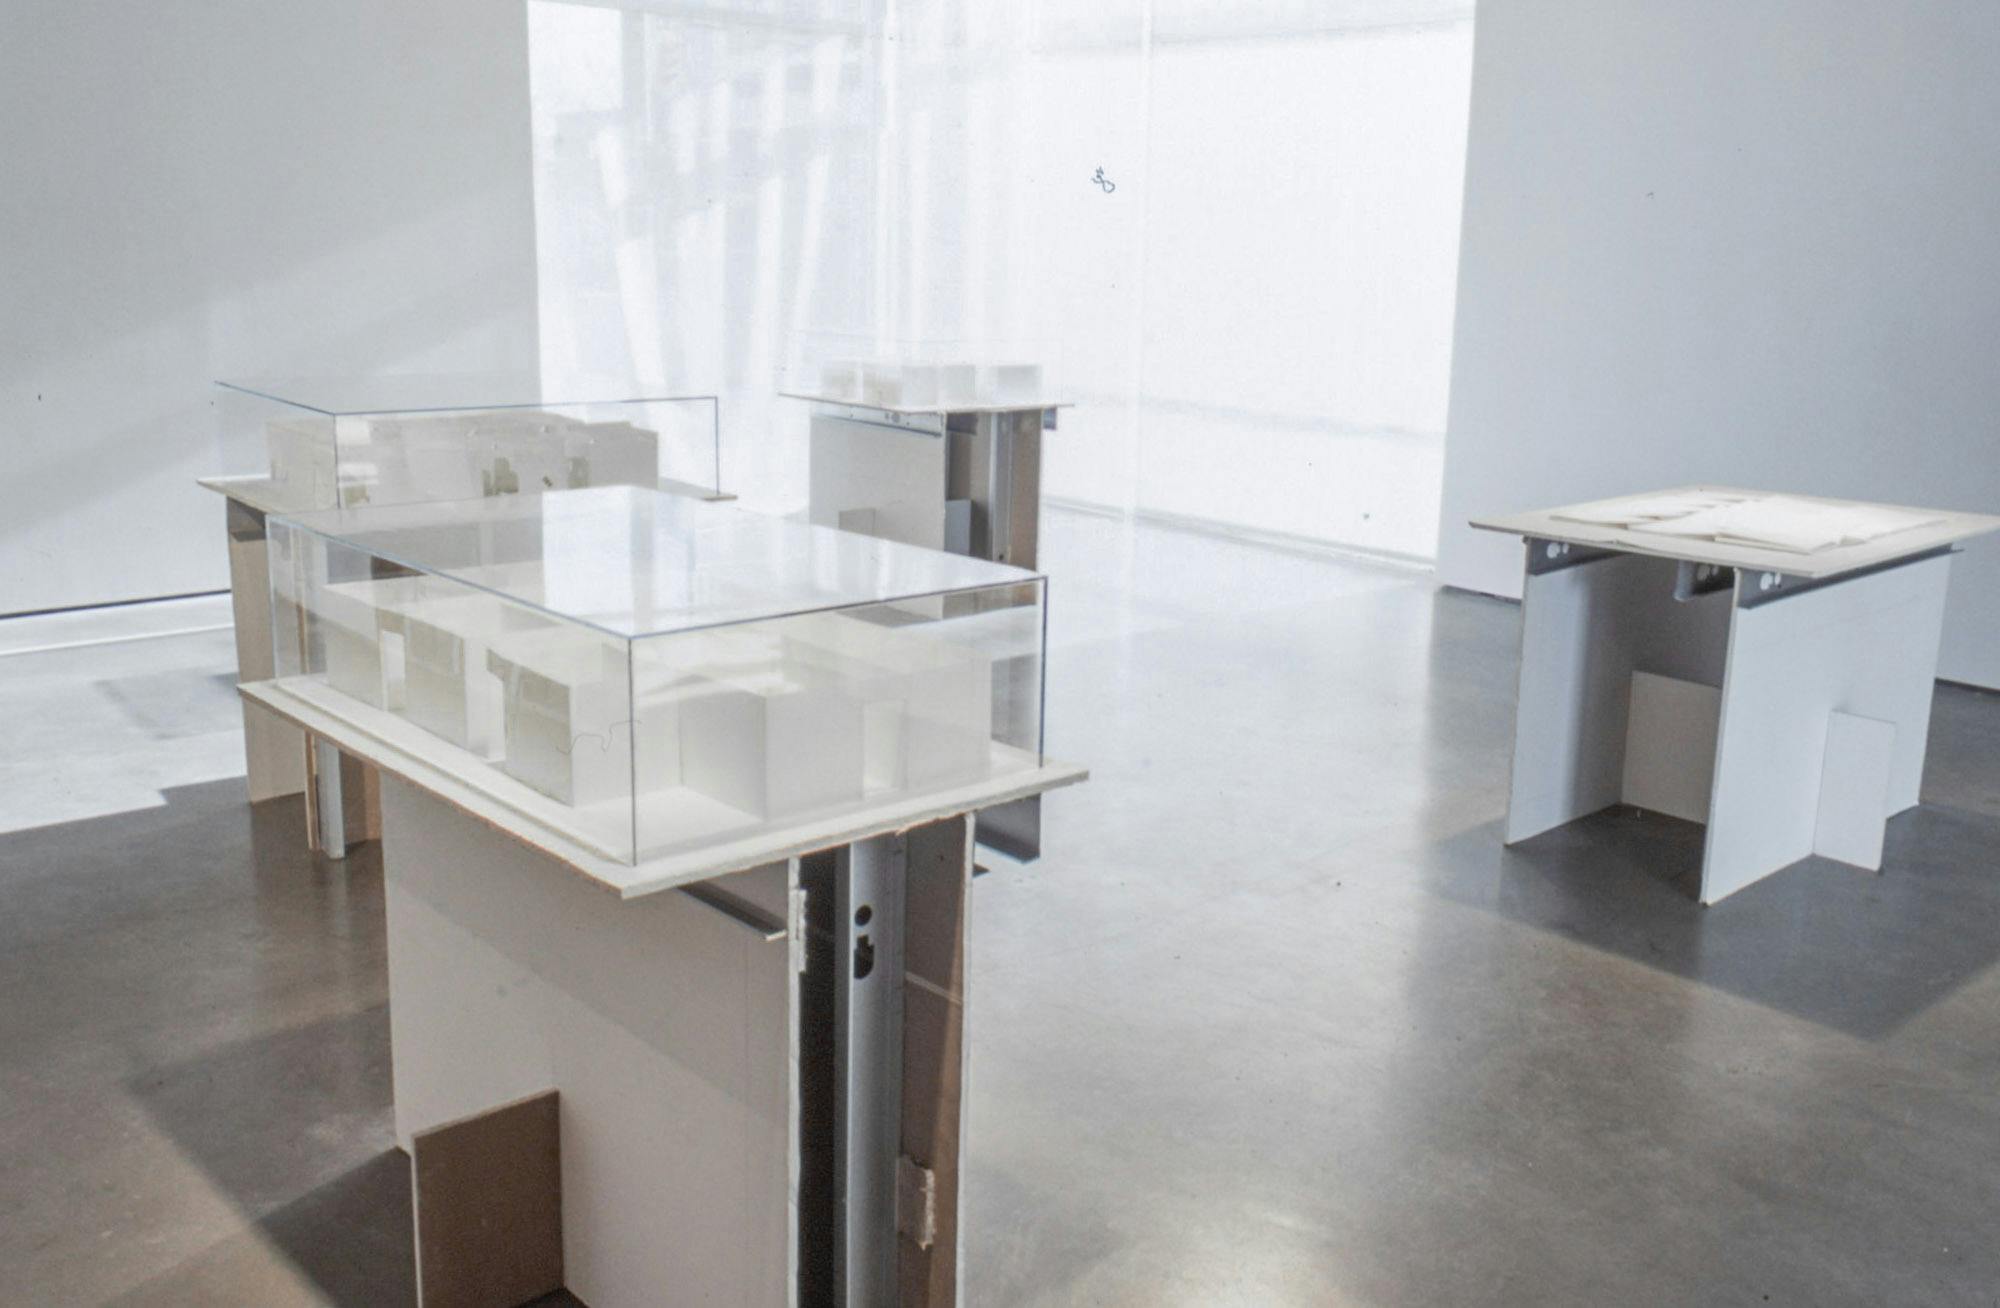 A set of white sculptures in display boxes are placed in a gallery space. Each sculpture displays a mockup of an architecture complex. 